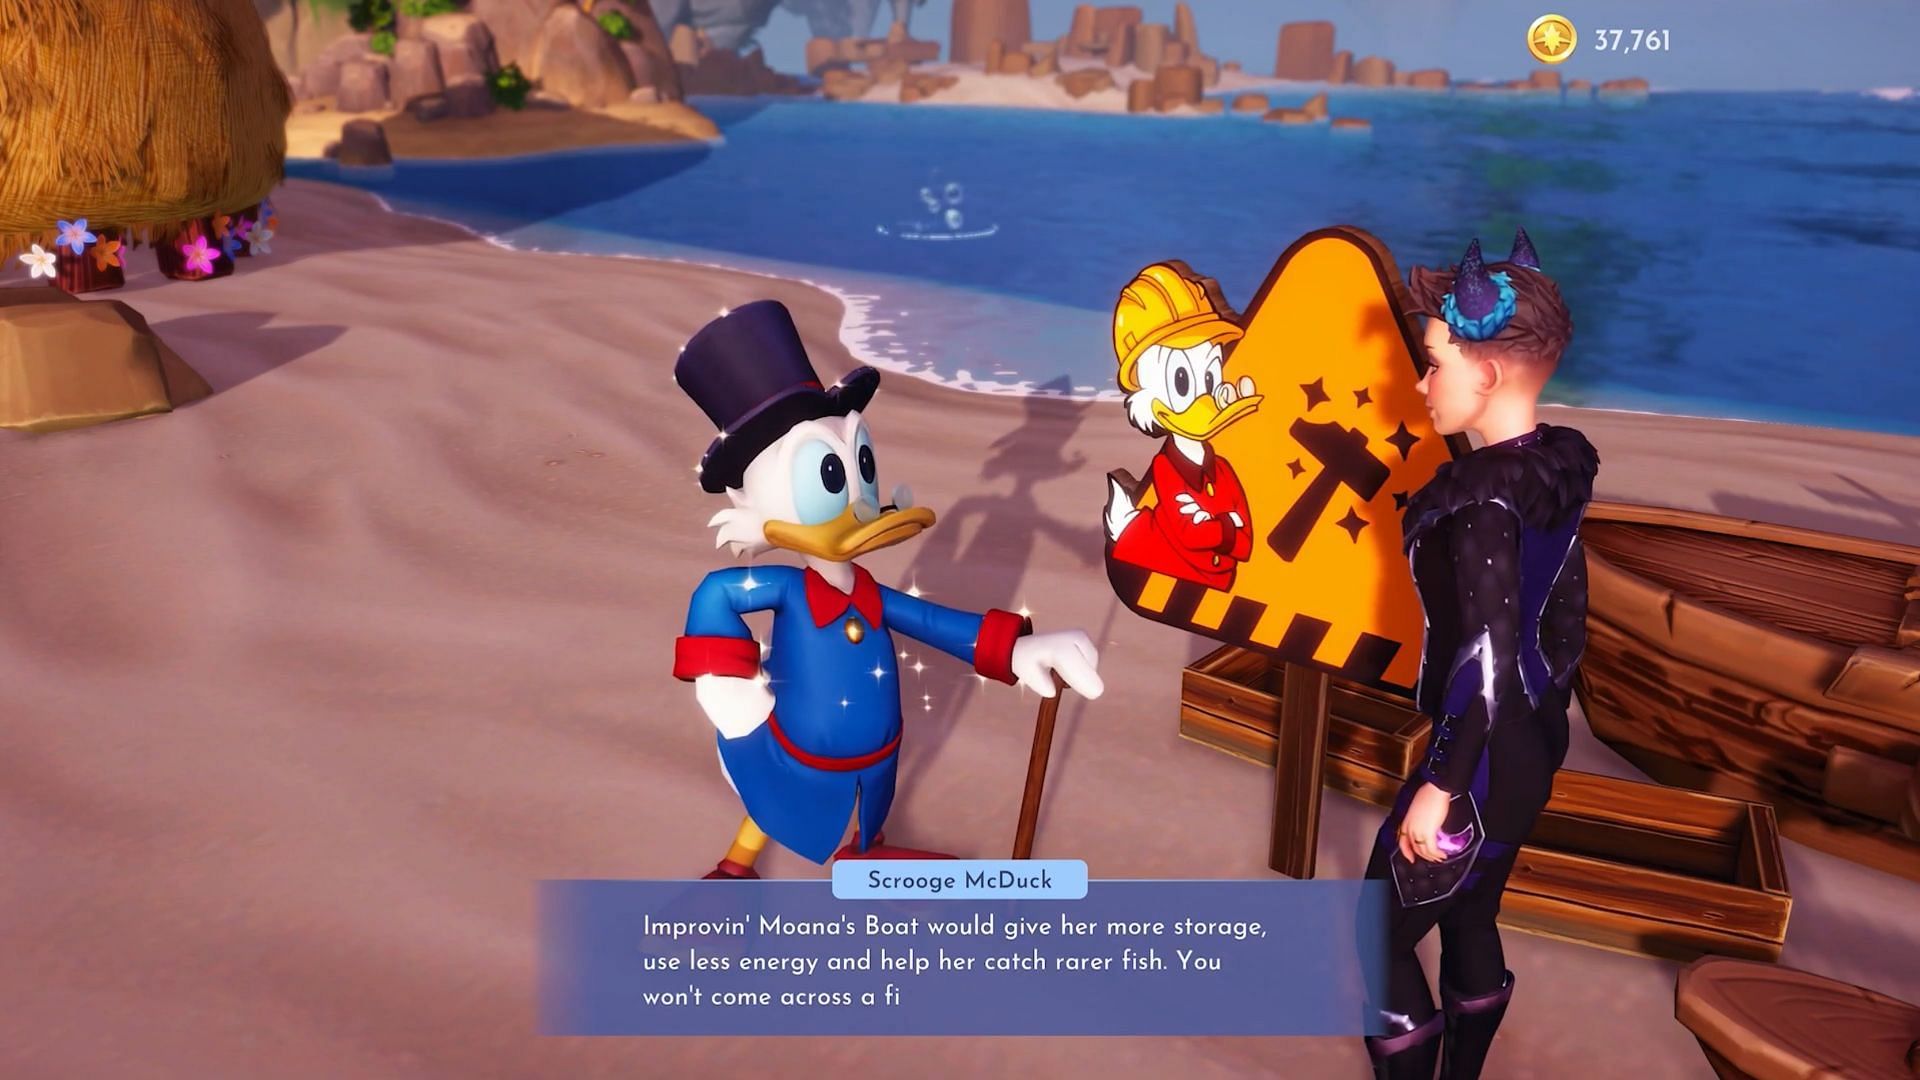 Scrooge McDuck at the beach, upgrading the repaired boat (Image via Gameloft)